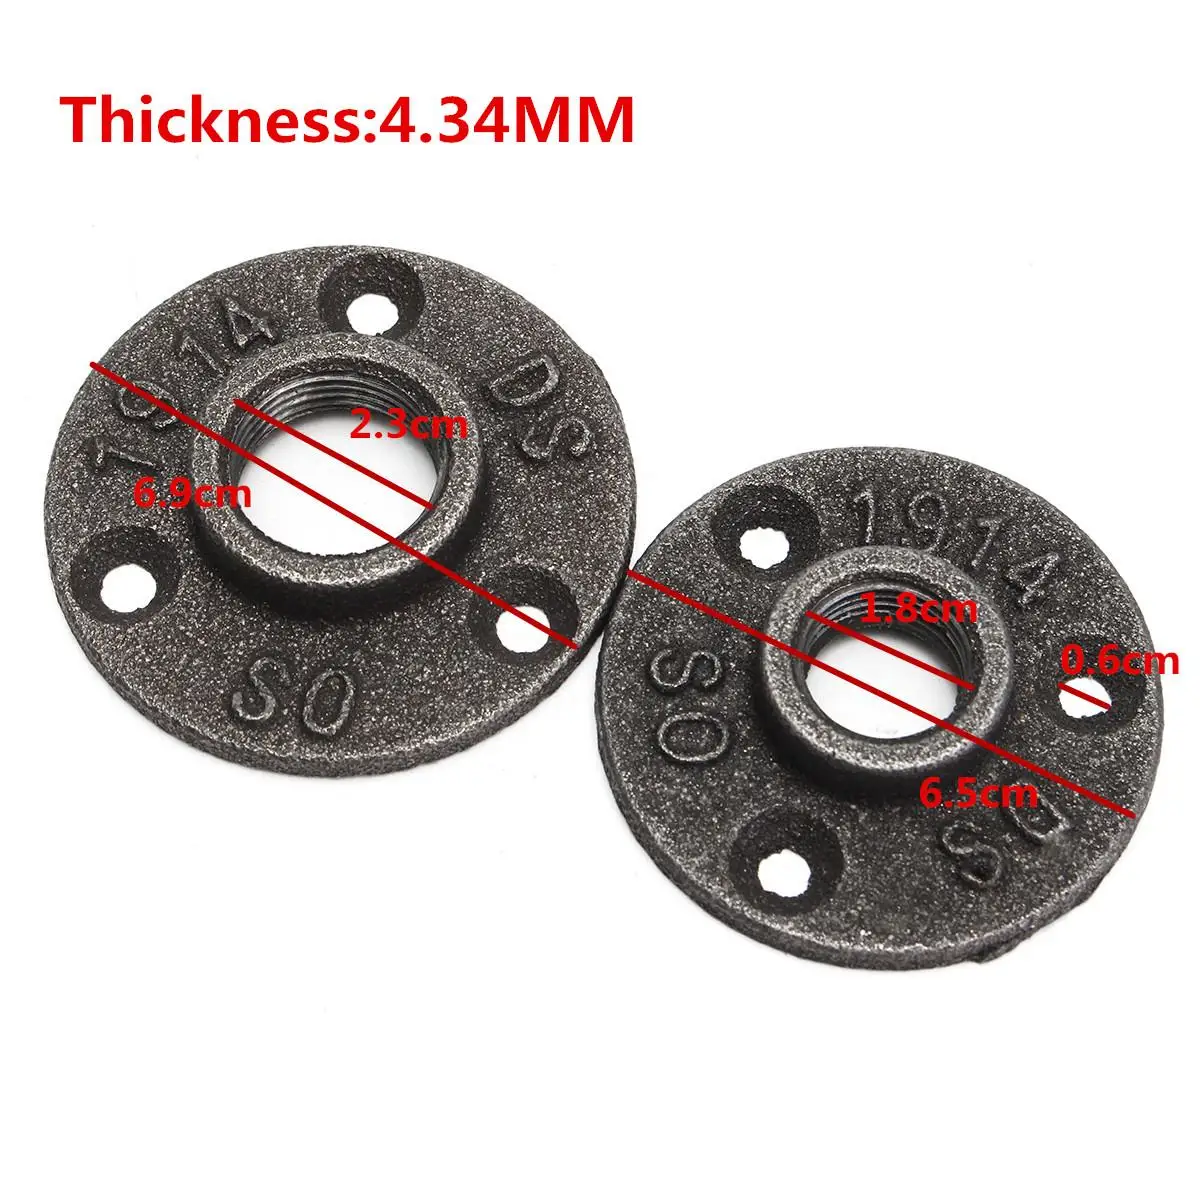 

1/2" 3/4" Black Decorative Malleable Iron Floor/Wall Flange Malleable Cast Iron Pipe Fittings BSP Threaded Hole 1pcs